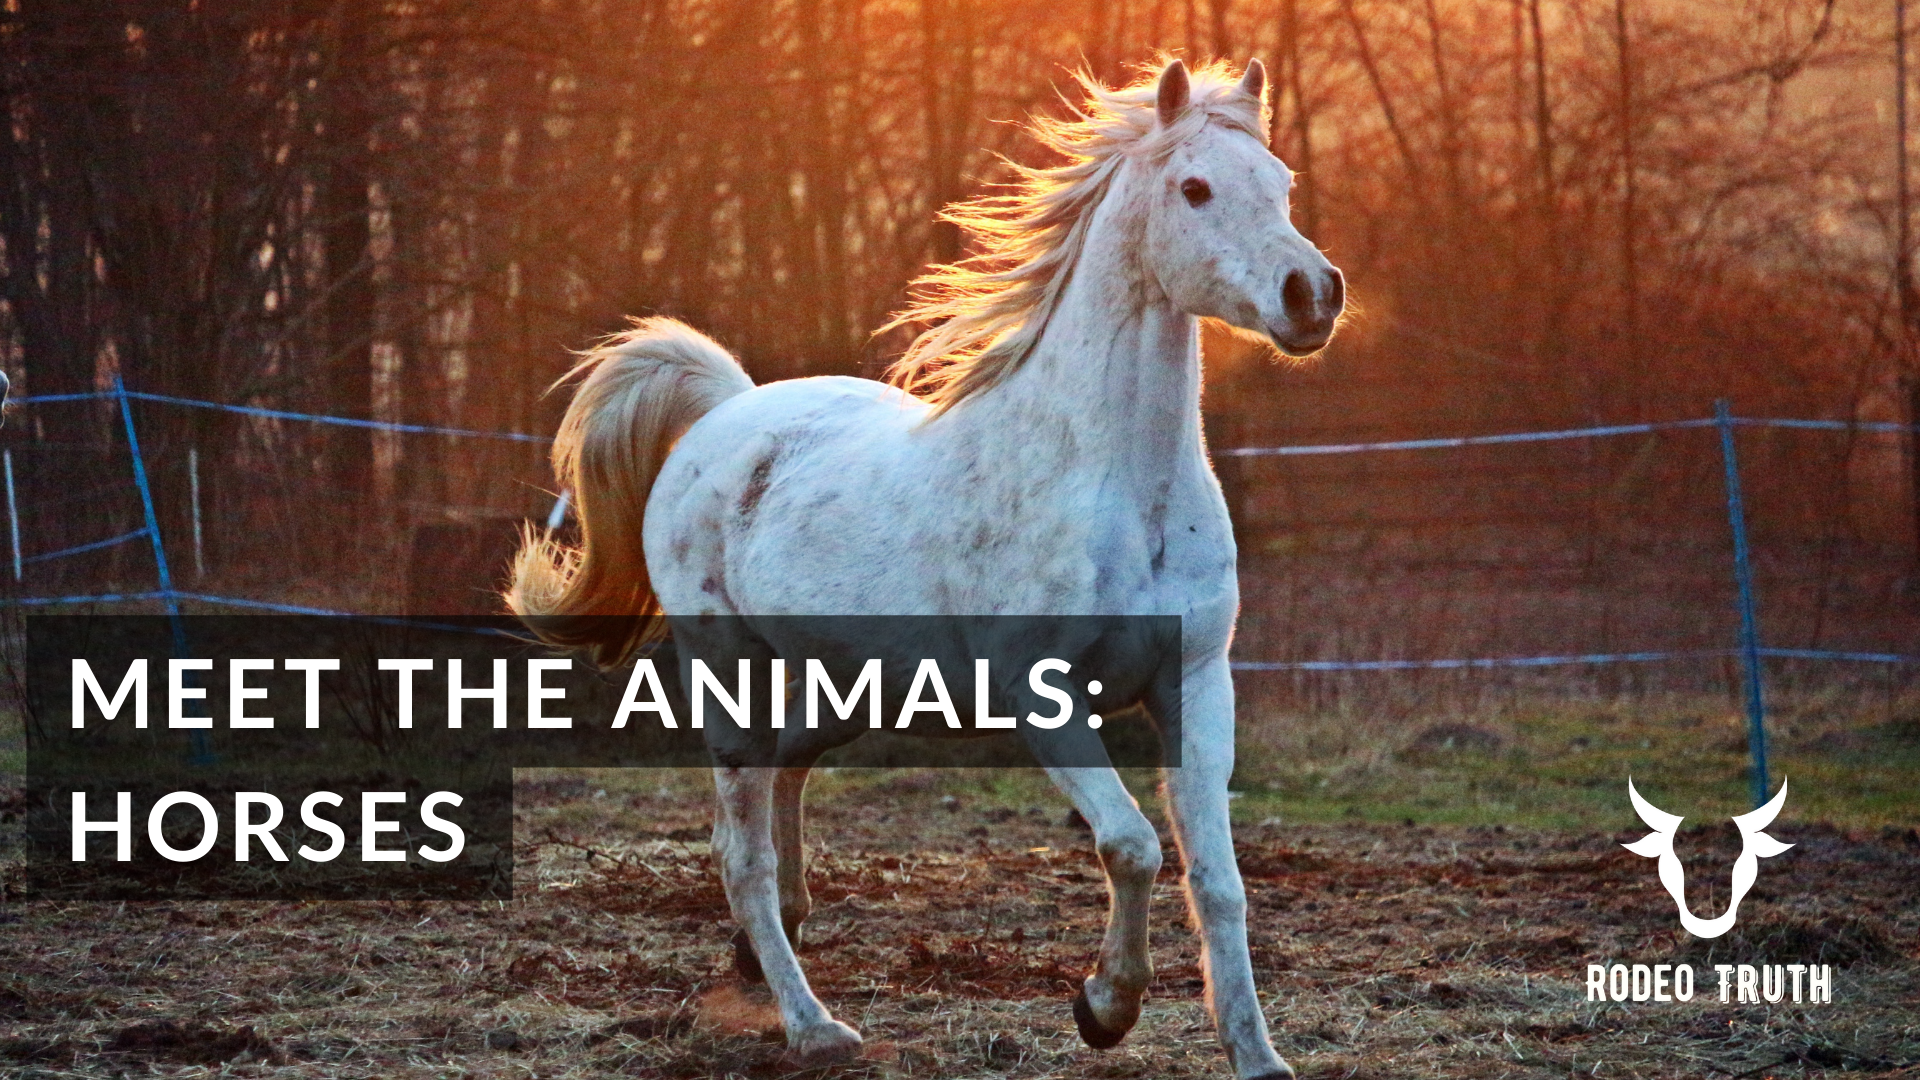 A white horse canters in a paddock at sunset with a text overlay that reads "Meet the animals: horses"